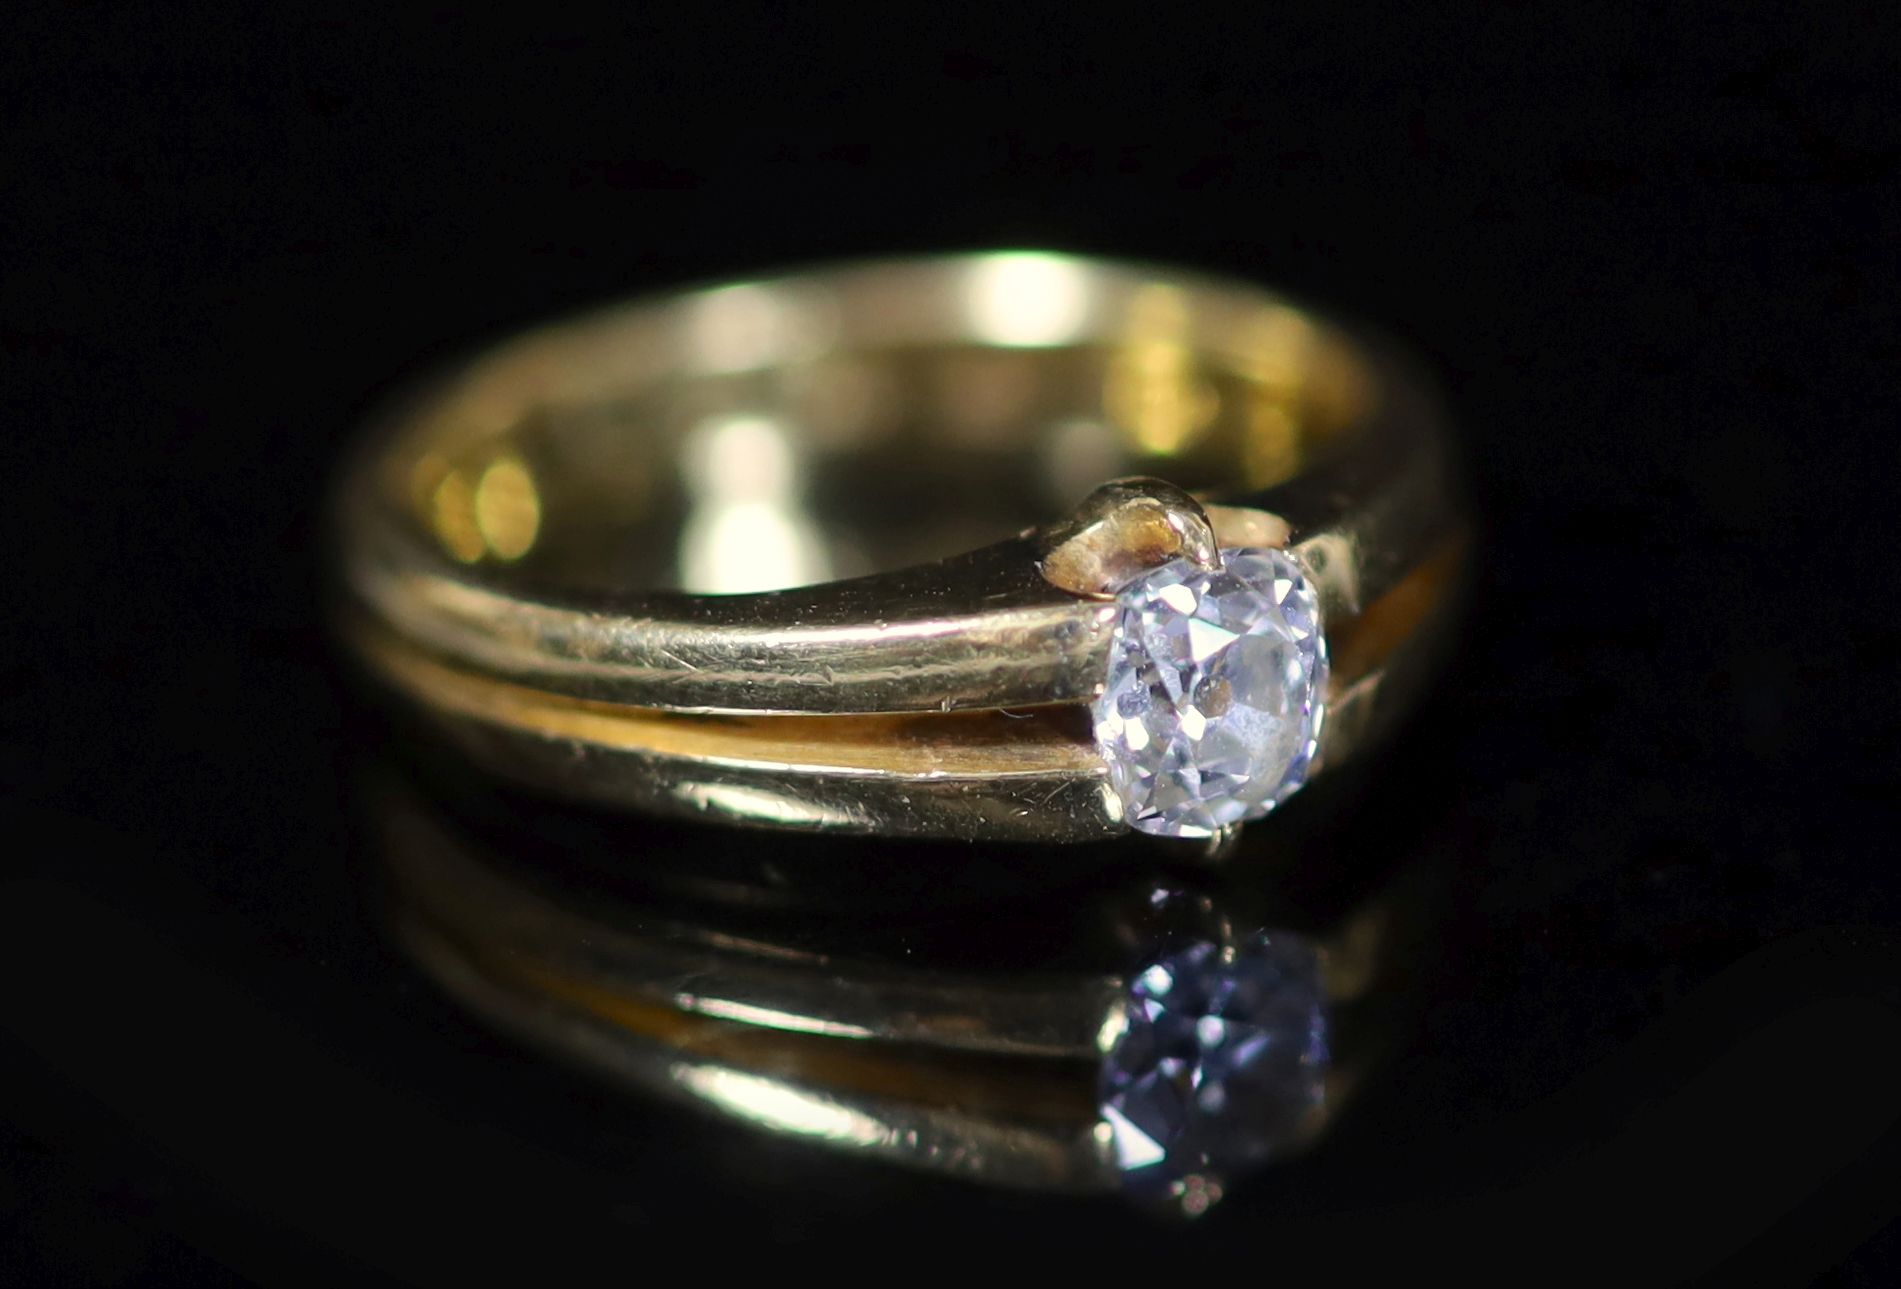 A late Victorian 22ct yellow gold diamond solitaire ring, the claw-set oval cut diamond approximately 0.5ct